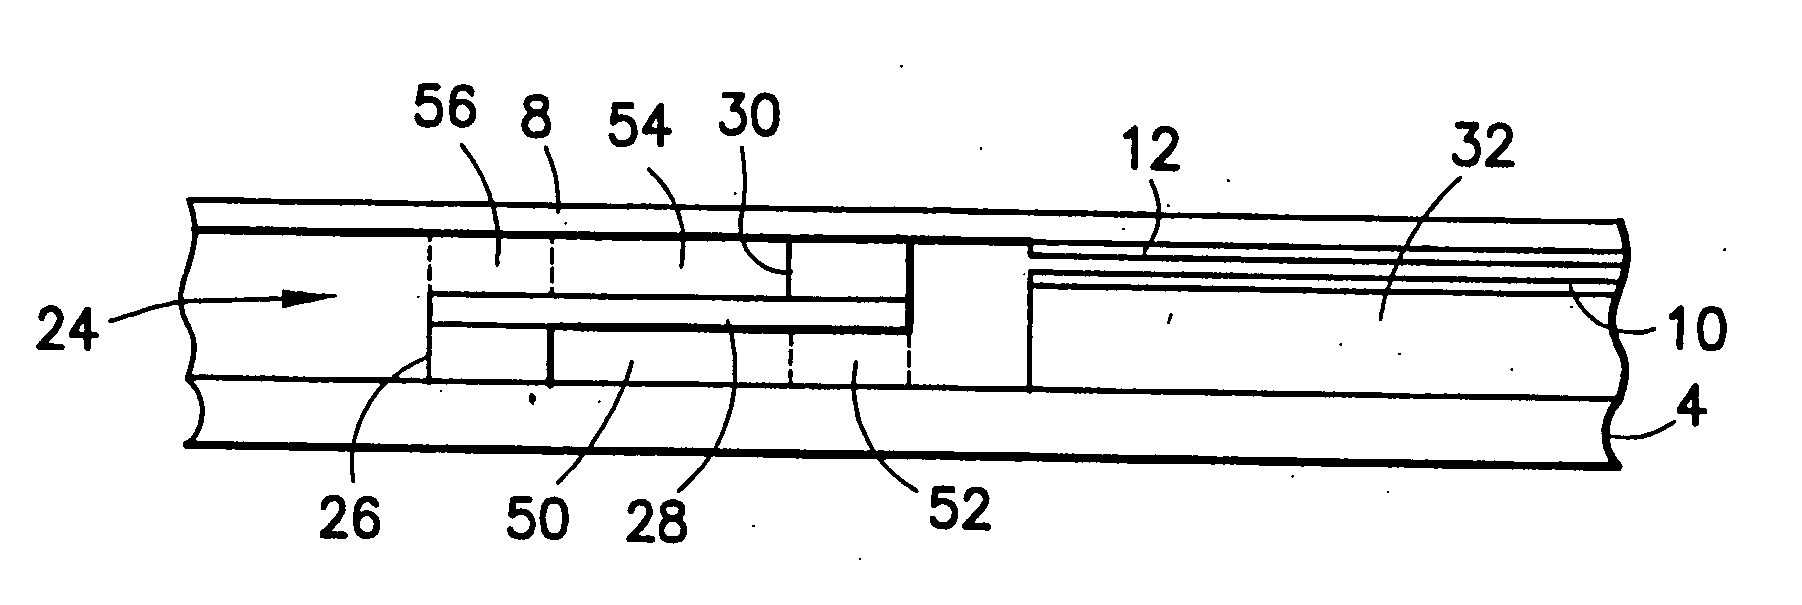 Micromachined ultrasonic transducer cells having compliant support structure